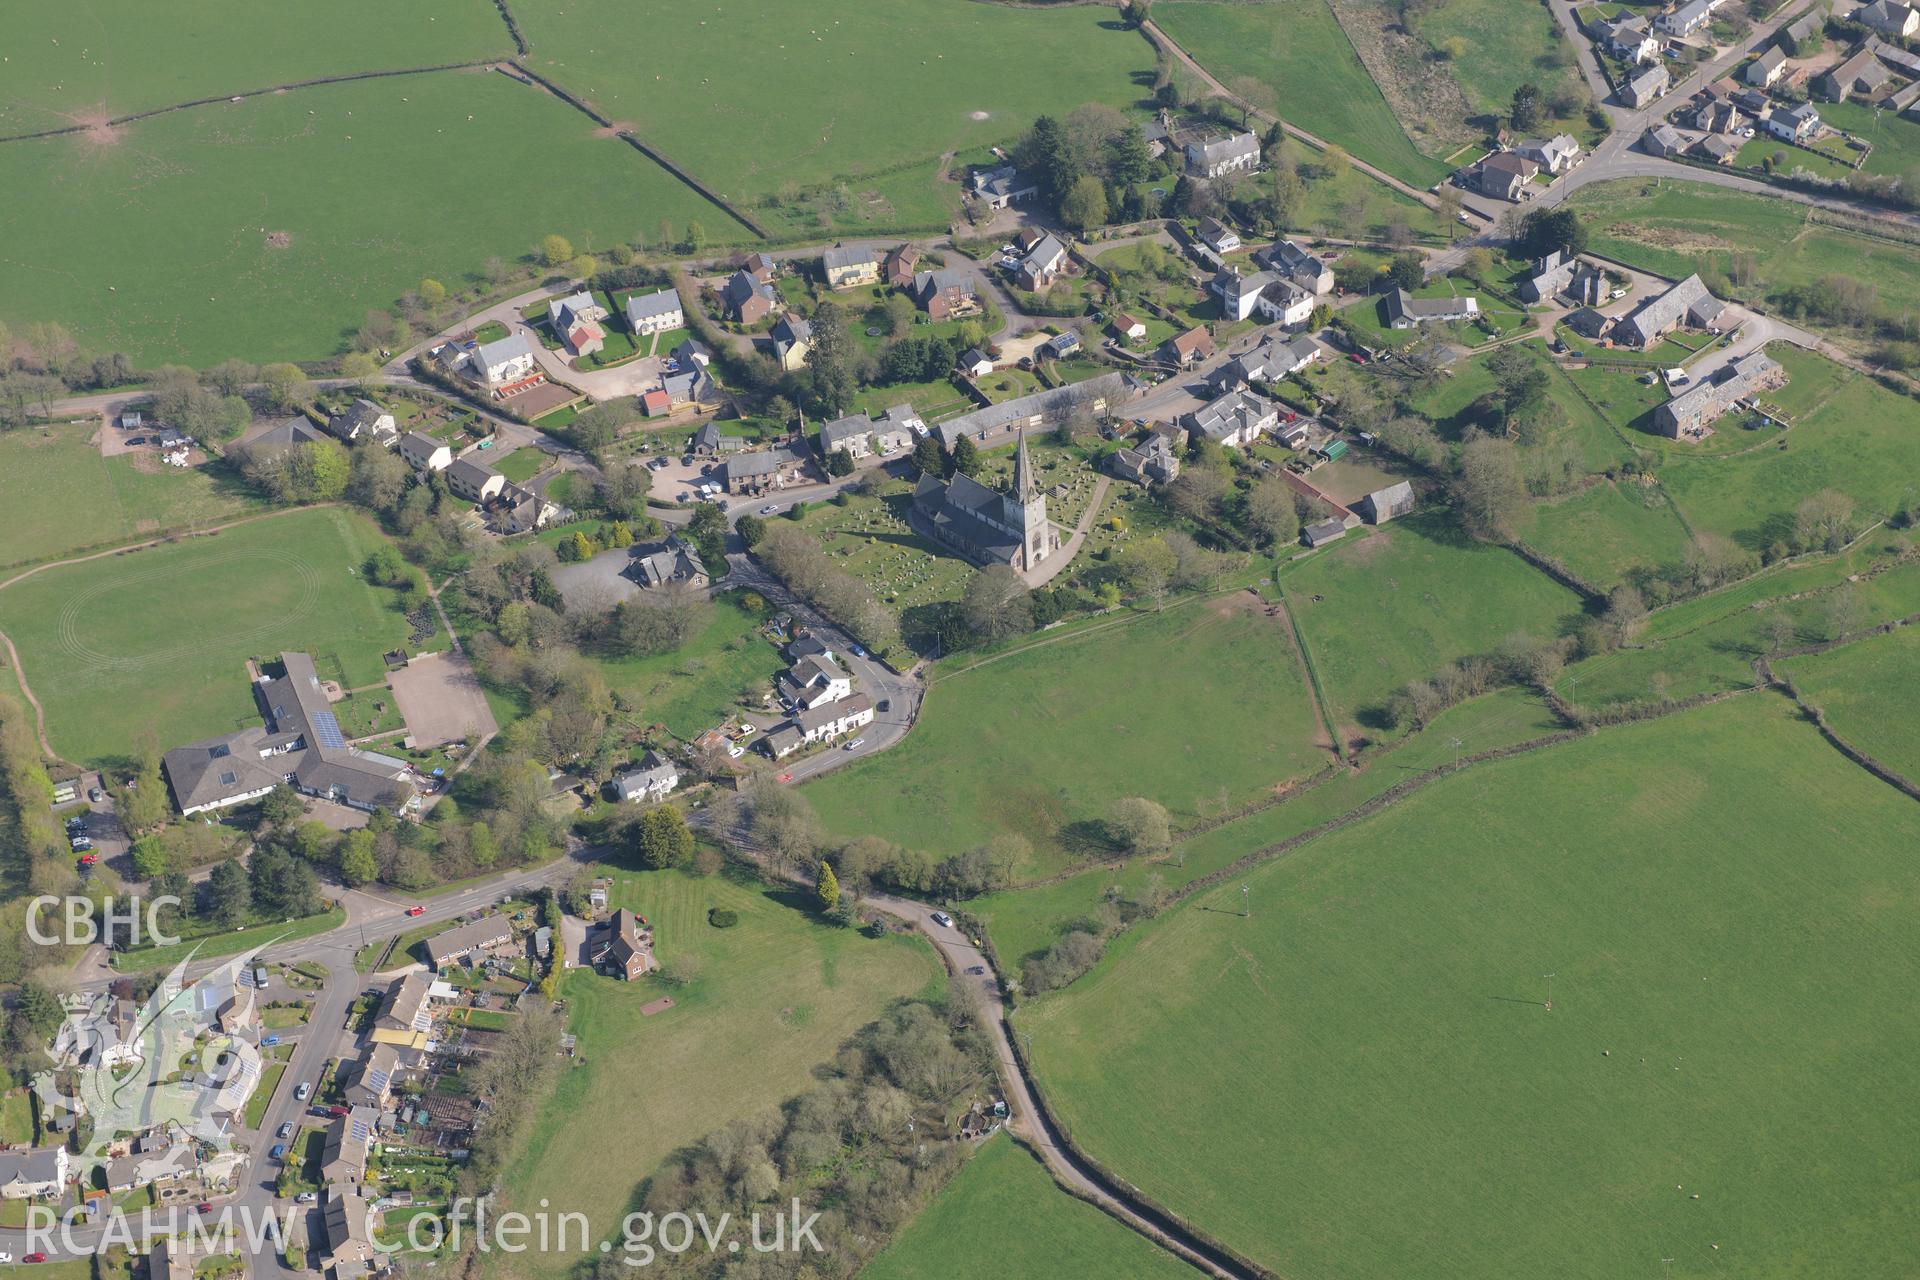 Trellech village and medieval borough including St. Nicholas' Church; medieval houses sites west of the Church and Trellech motte. Oblique aerial photograph taken during the Royal Commission?s programme of archaeological aerial reconnaissance by Toby Driver on 21st April 2015.